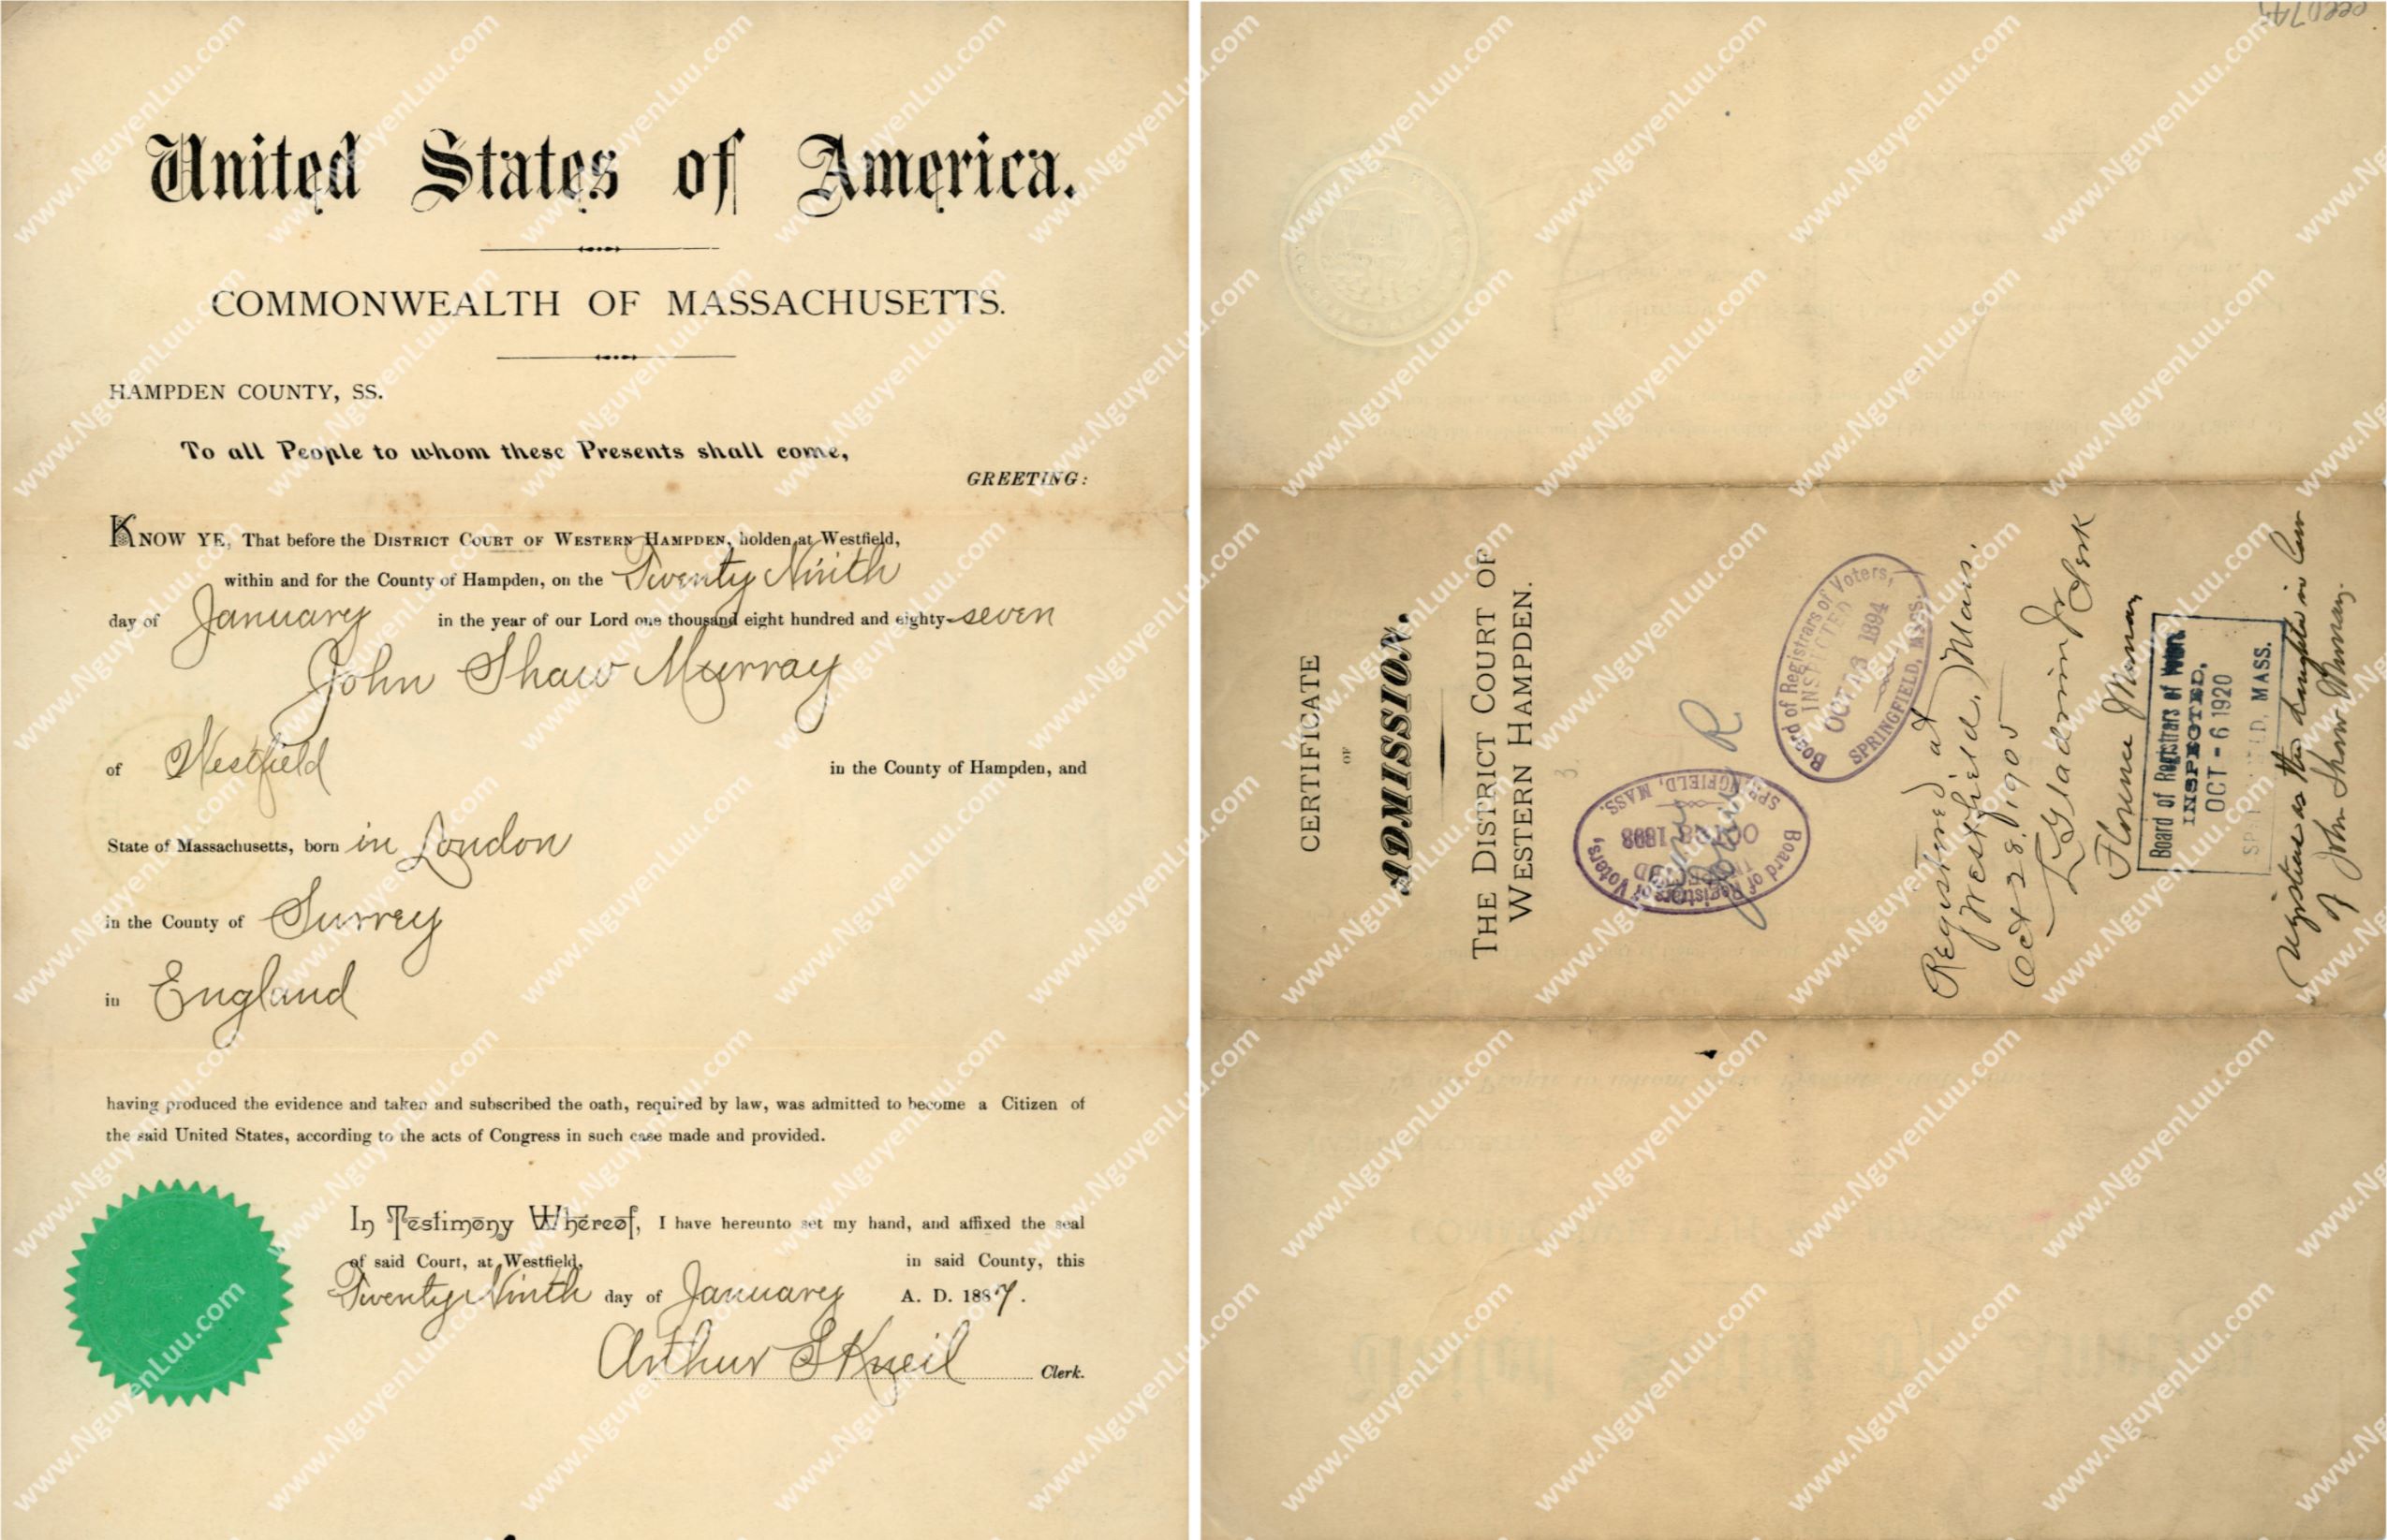 U.S. Certificate of Citizenship issued in the State of Massachusetts in 1887